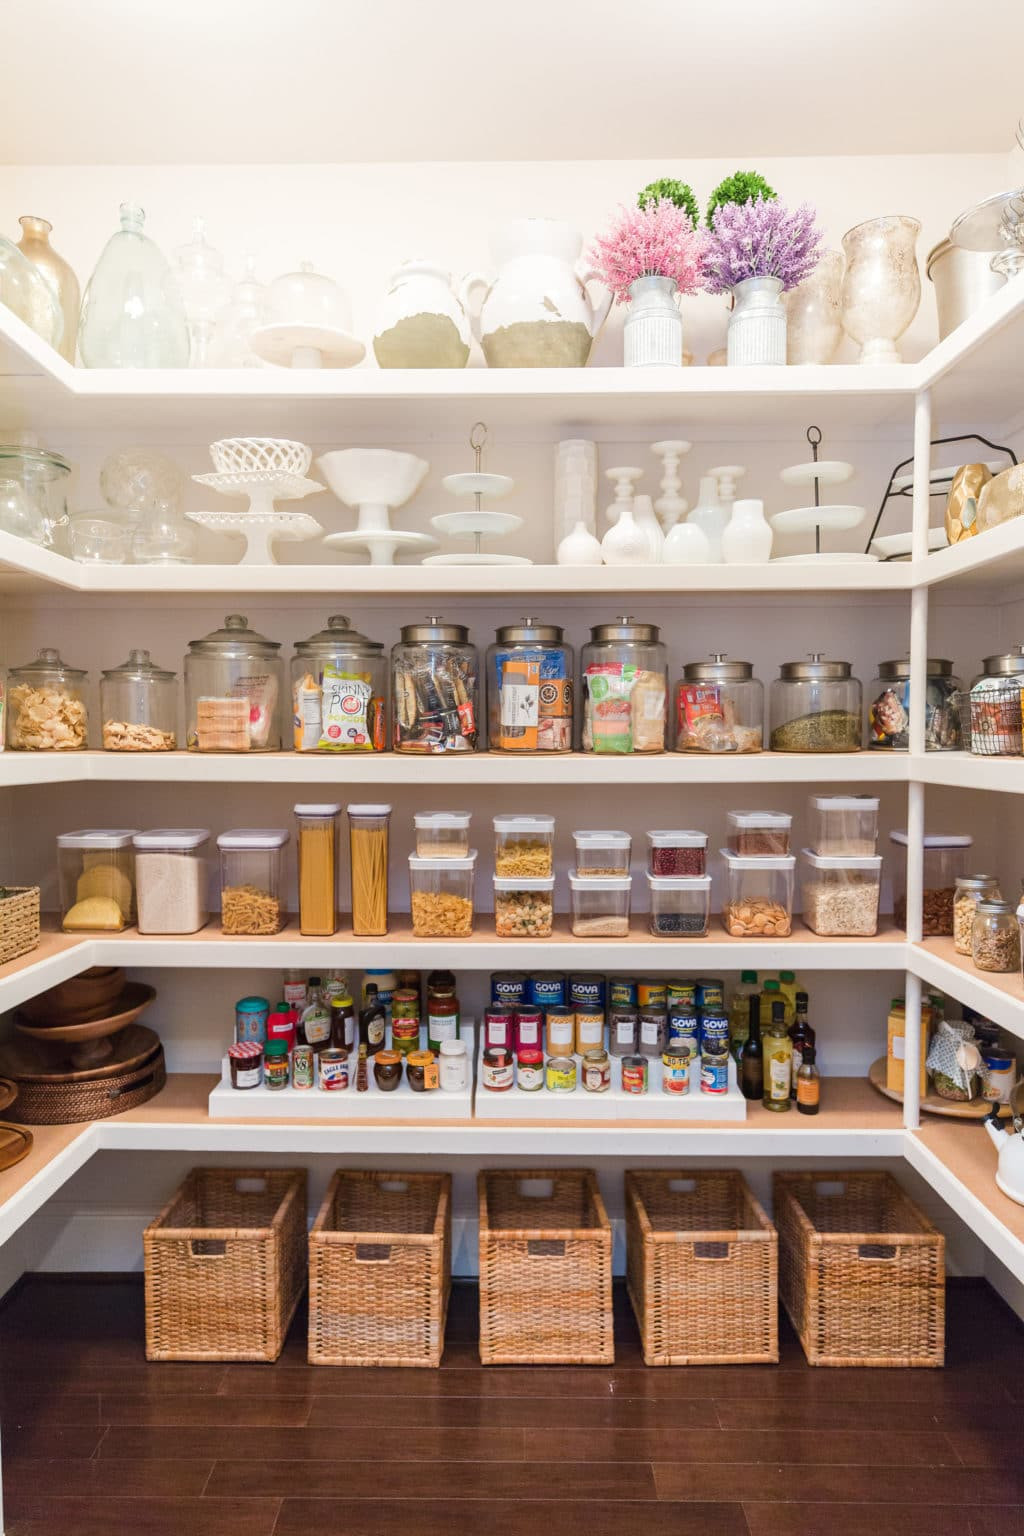 Kitchen Pantry Organizers
 10 Clever Ways to Keep an Organized Pantry